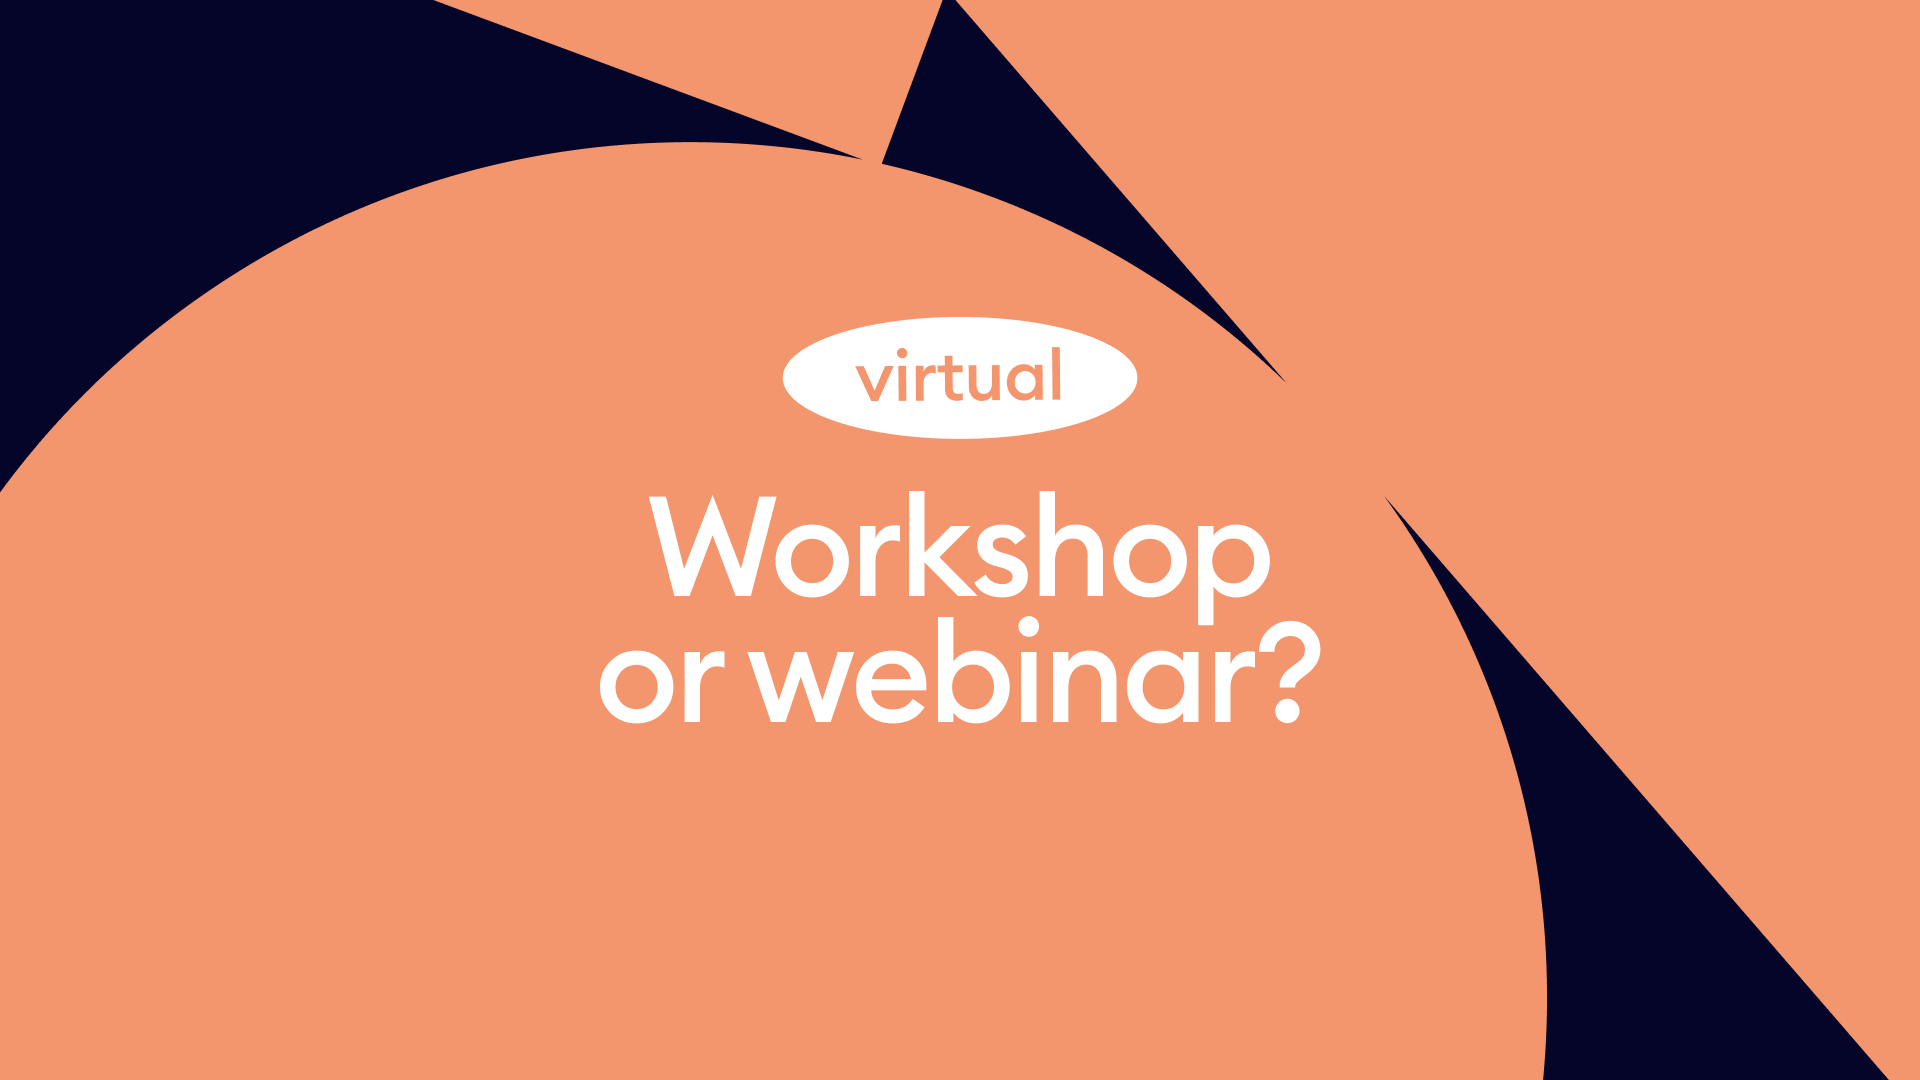 Workshop or webinar? Find the difference and which format to choose